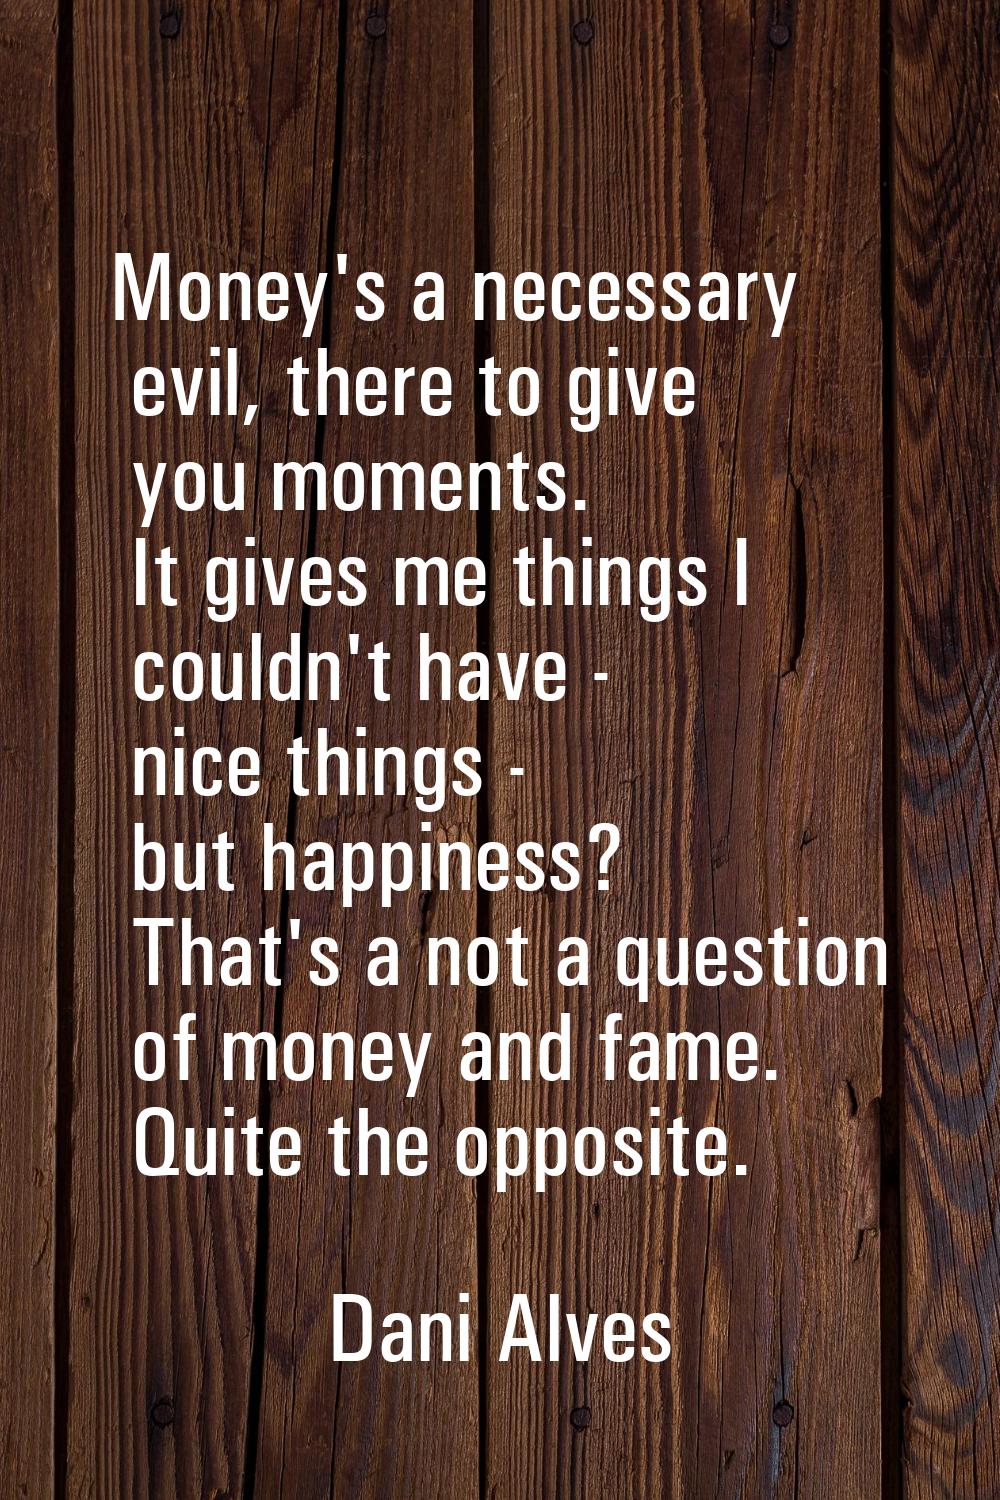 Money's a necessary evil, there to give you moments. It gives me things I couldn't have - nice thin